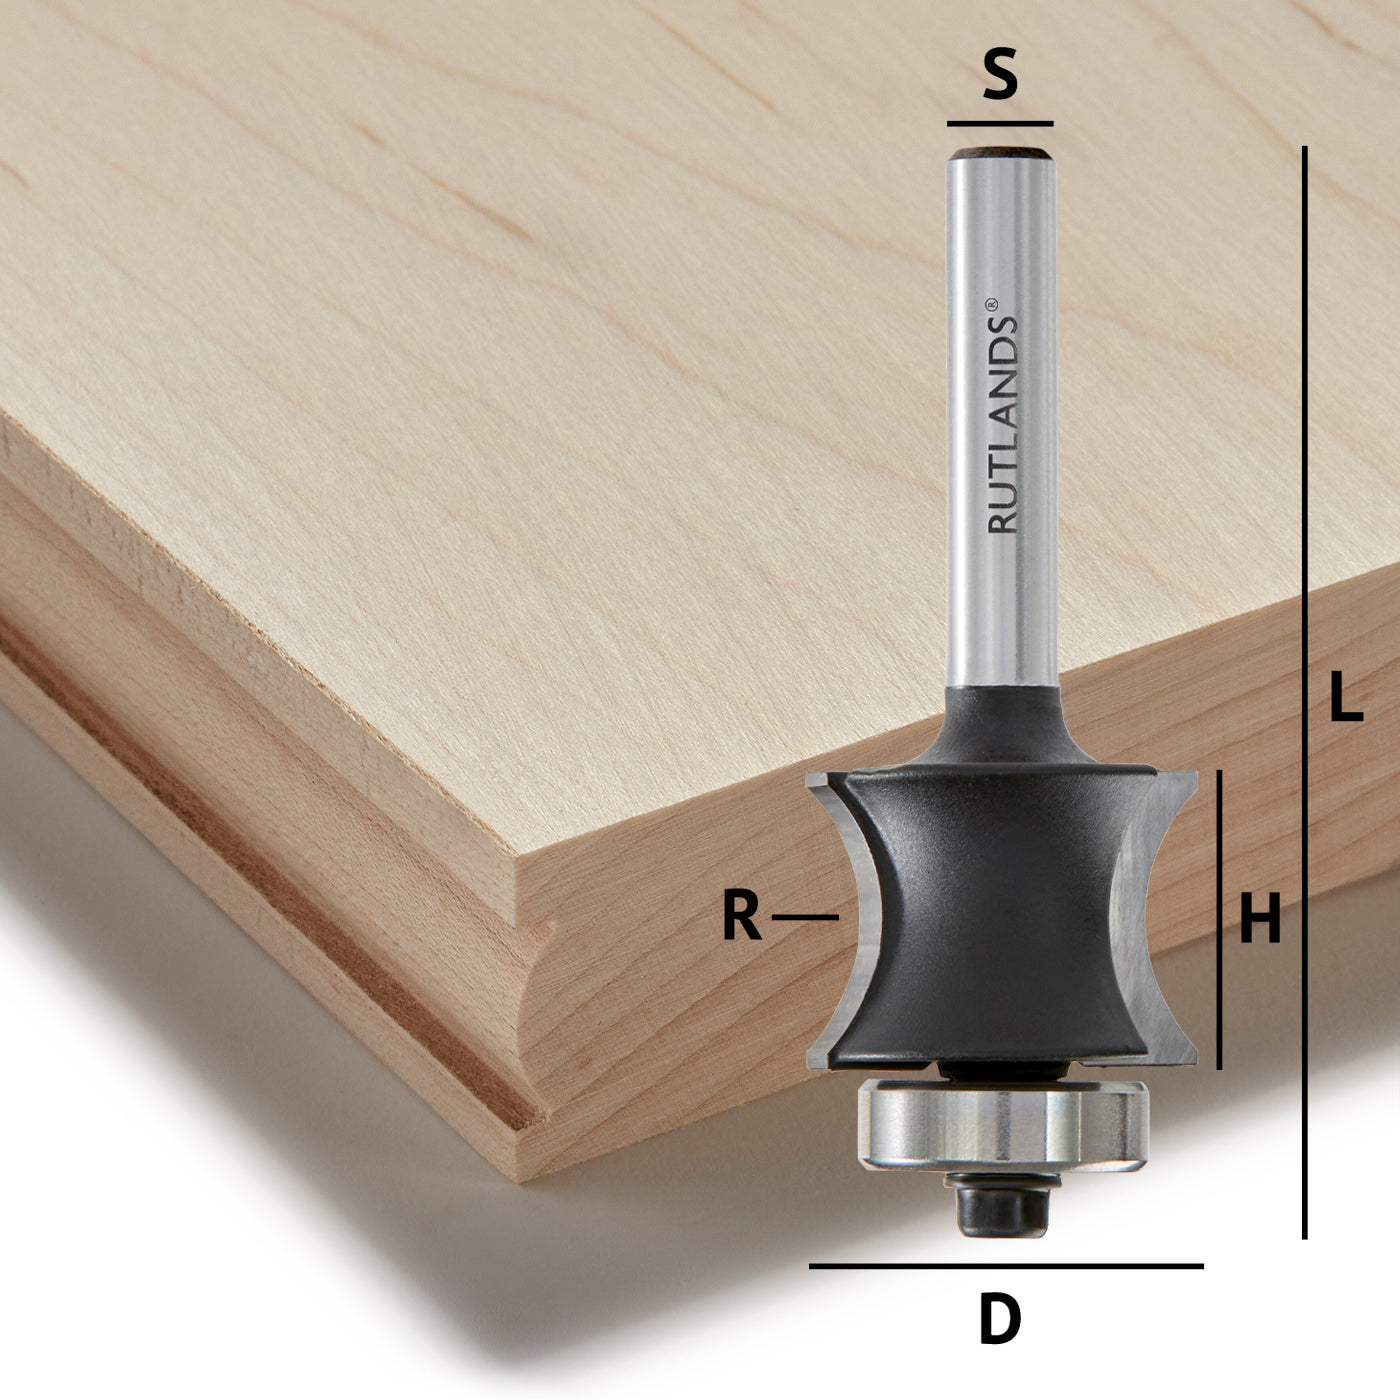 Router Bit - Sunk Bead with Bearing - D=22mm H=16mm R=10mm L=60mm S=1/4"